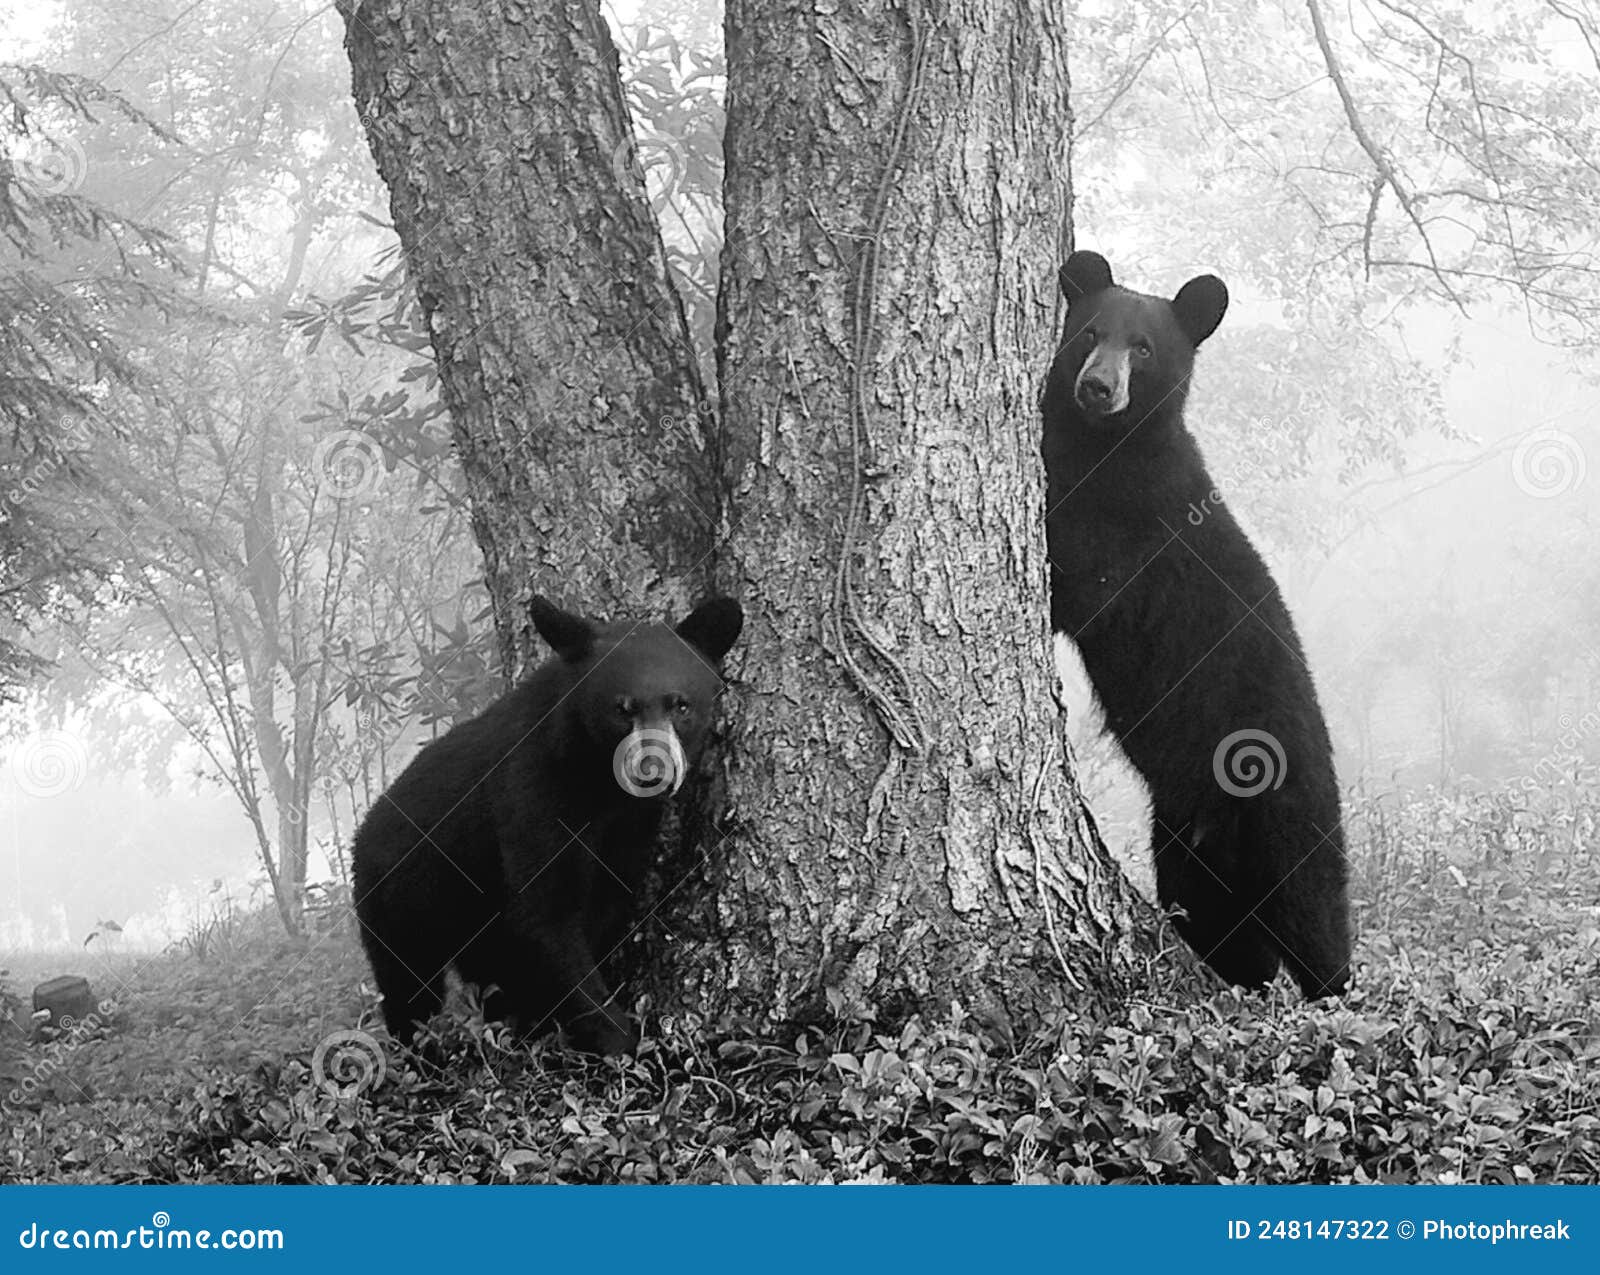 siblings. black bear yearling hanging around a tree in the mountians in black and white.